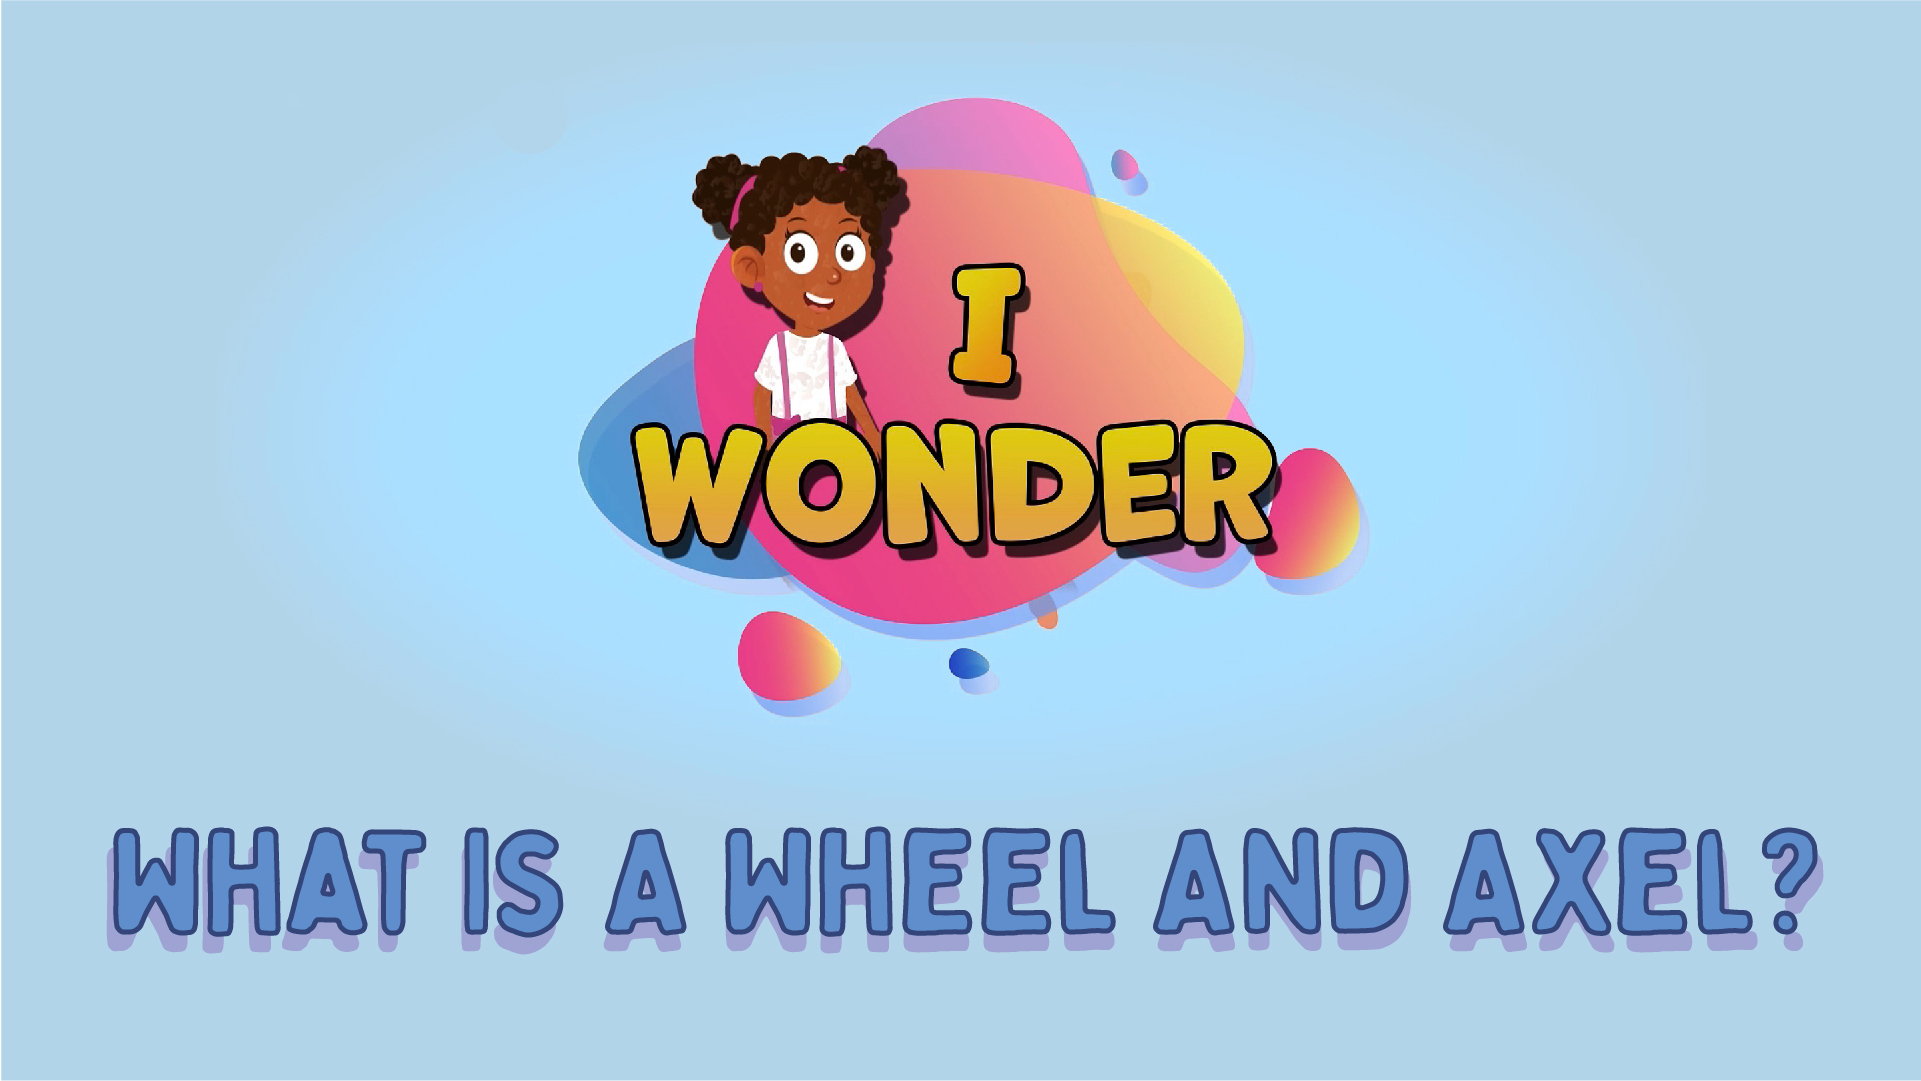 What Is A Wheel And Axel?